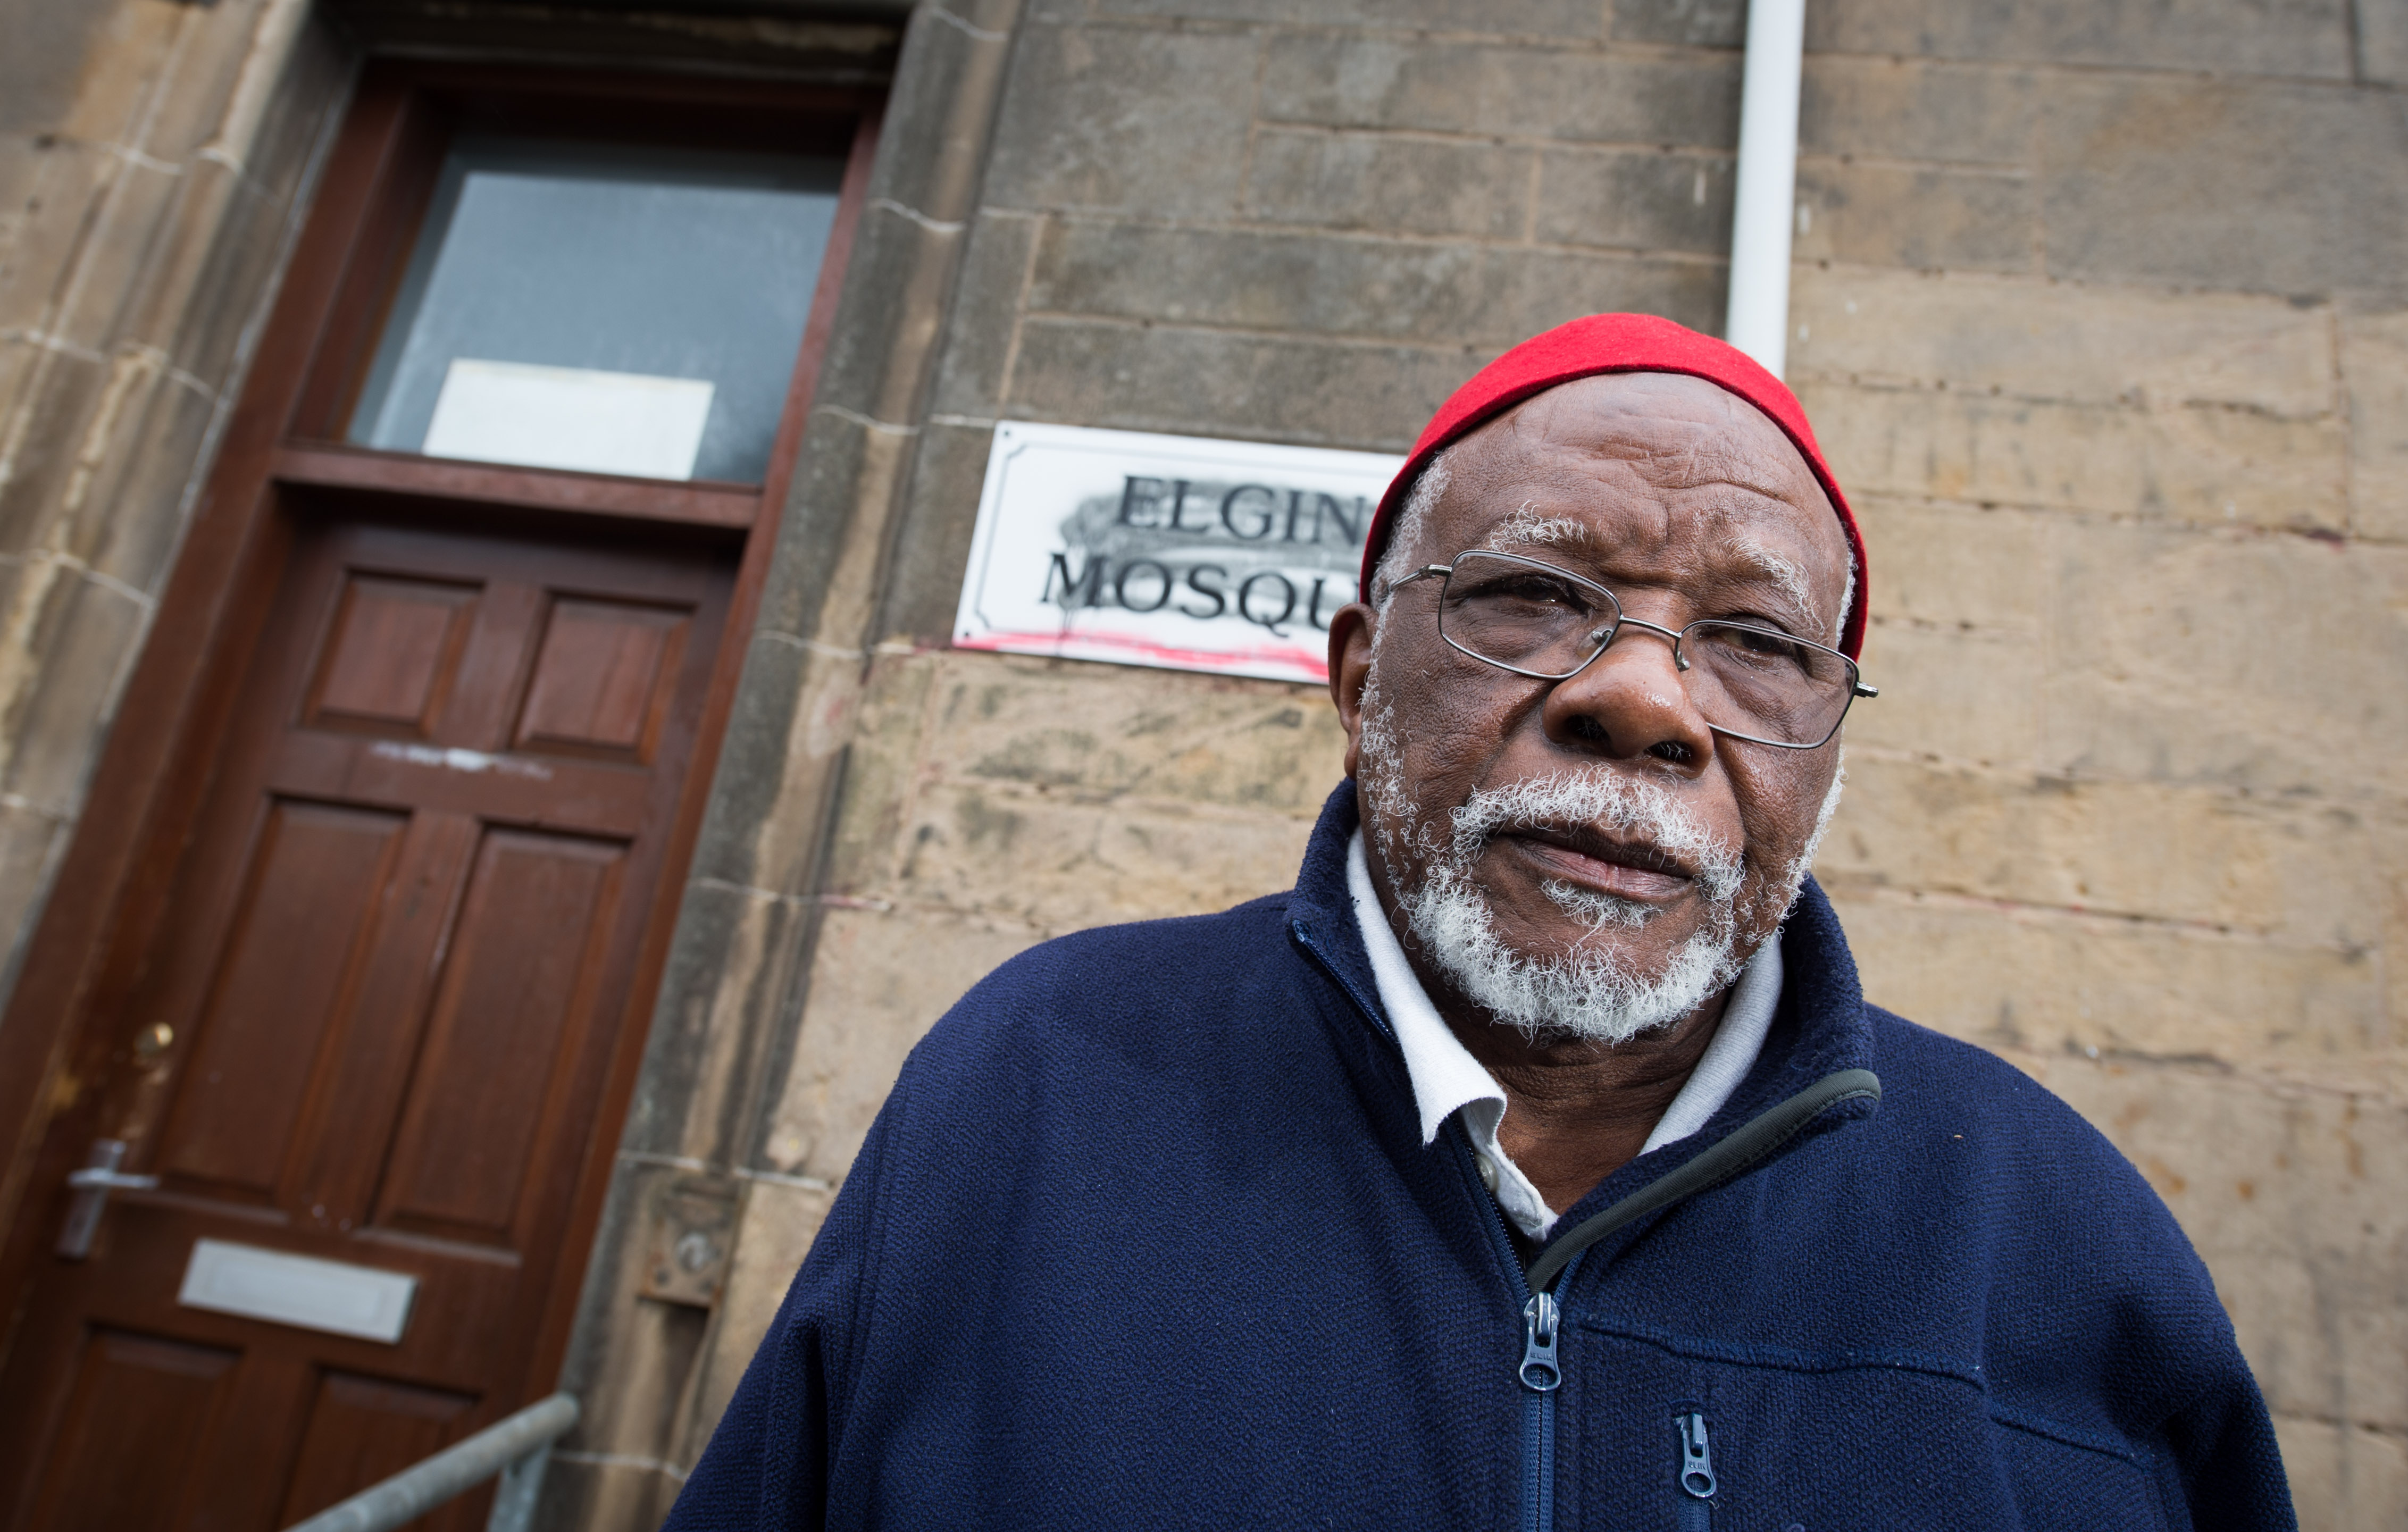 Lansana Bangura, chairman of Elgin Mosque, stands with some of the graffiti.